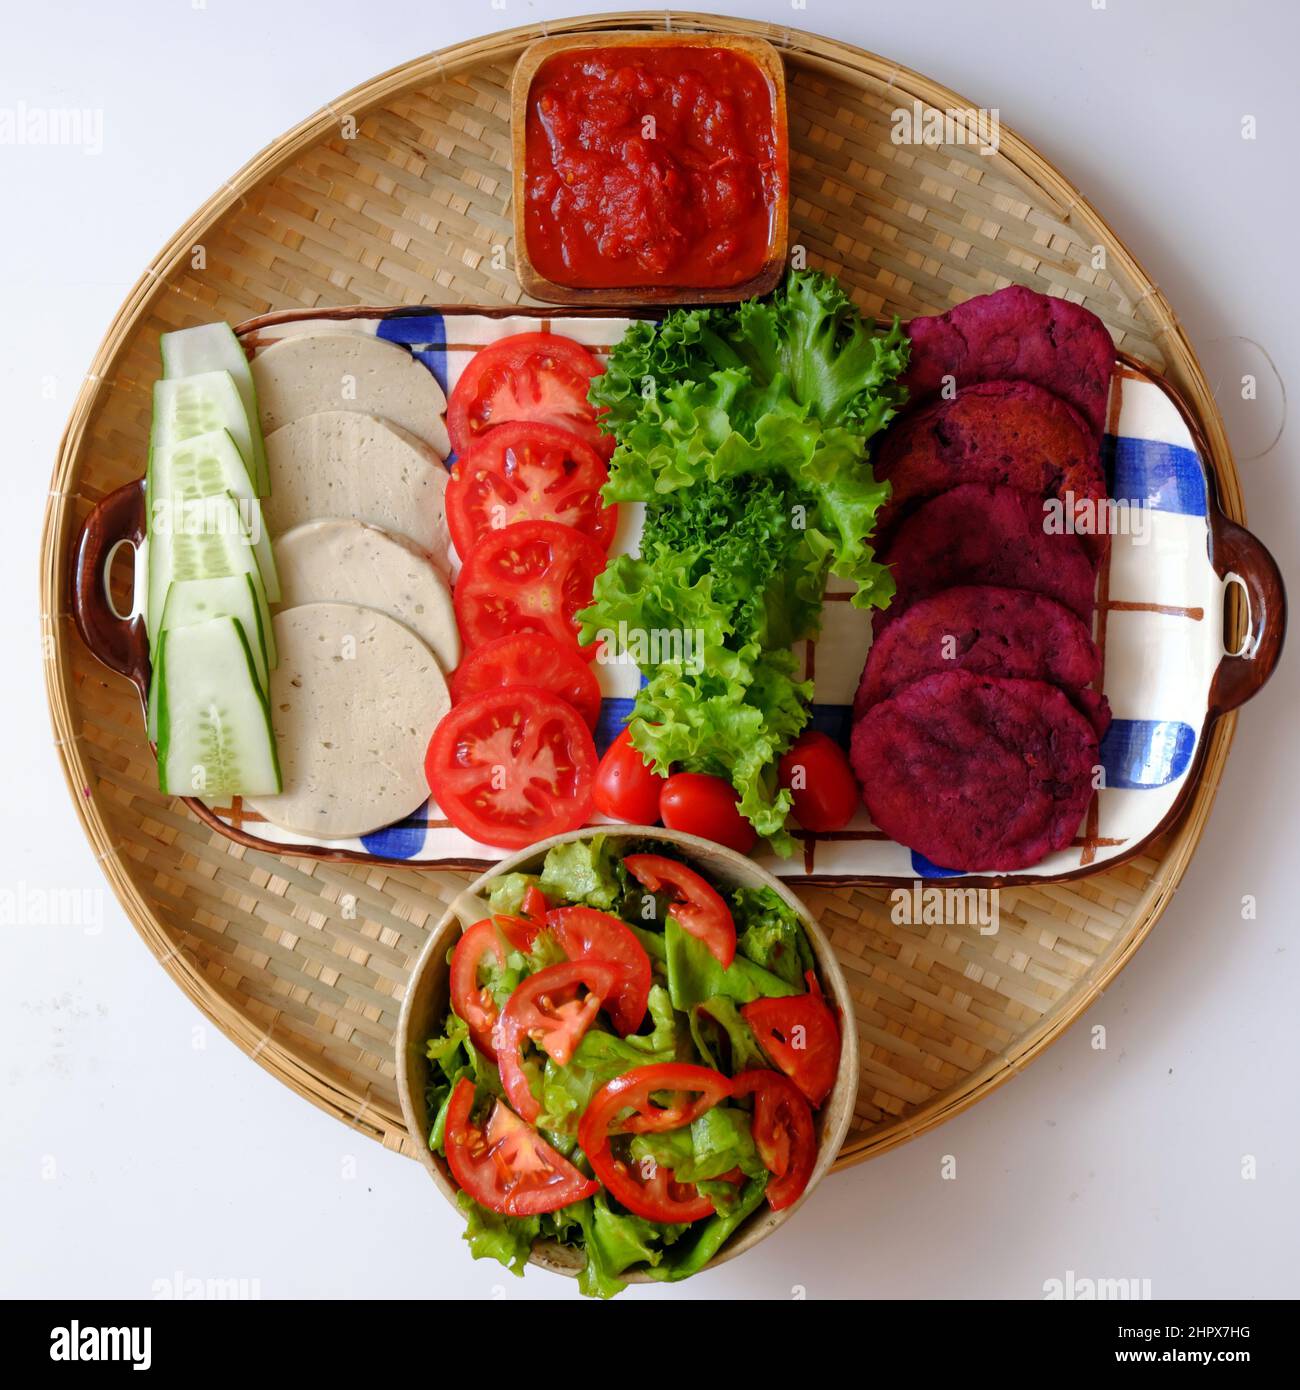 Amazing colorful raw material food for vegan hamburger from violet sweet potato with tomato sauce, salad, cucumber, healthy food for breakfast that ri Stock Photo